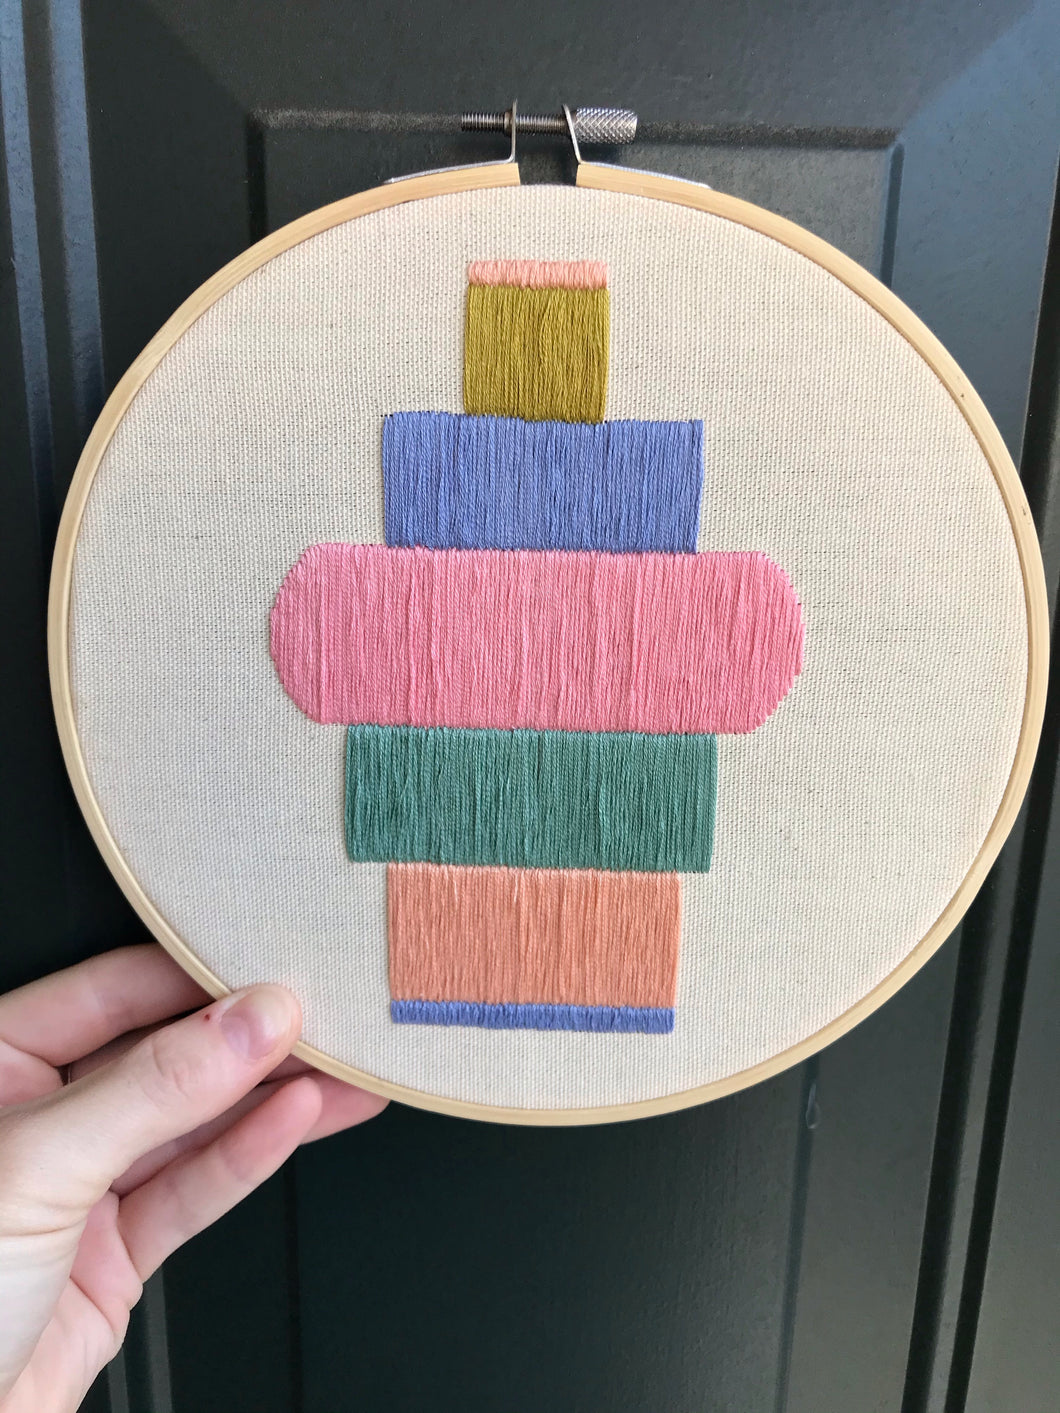 8.25” Color Geometric Shapes Hand-Embroidered Hoop